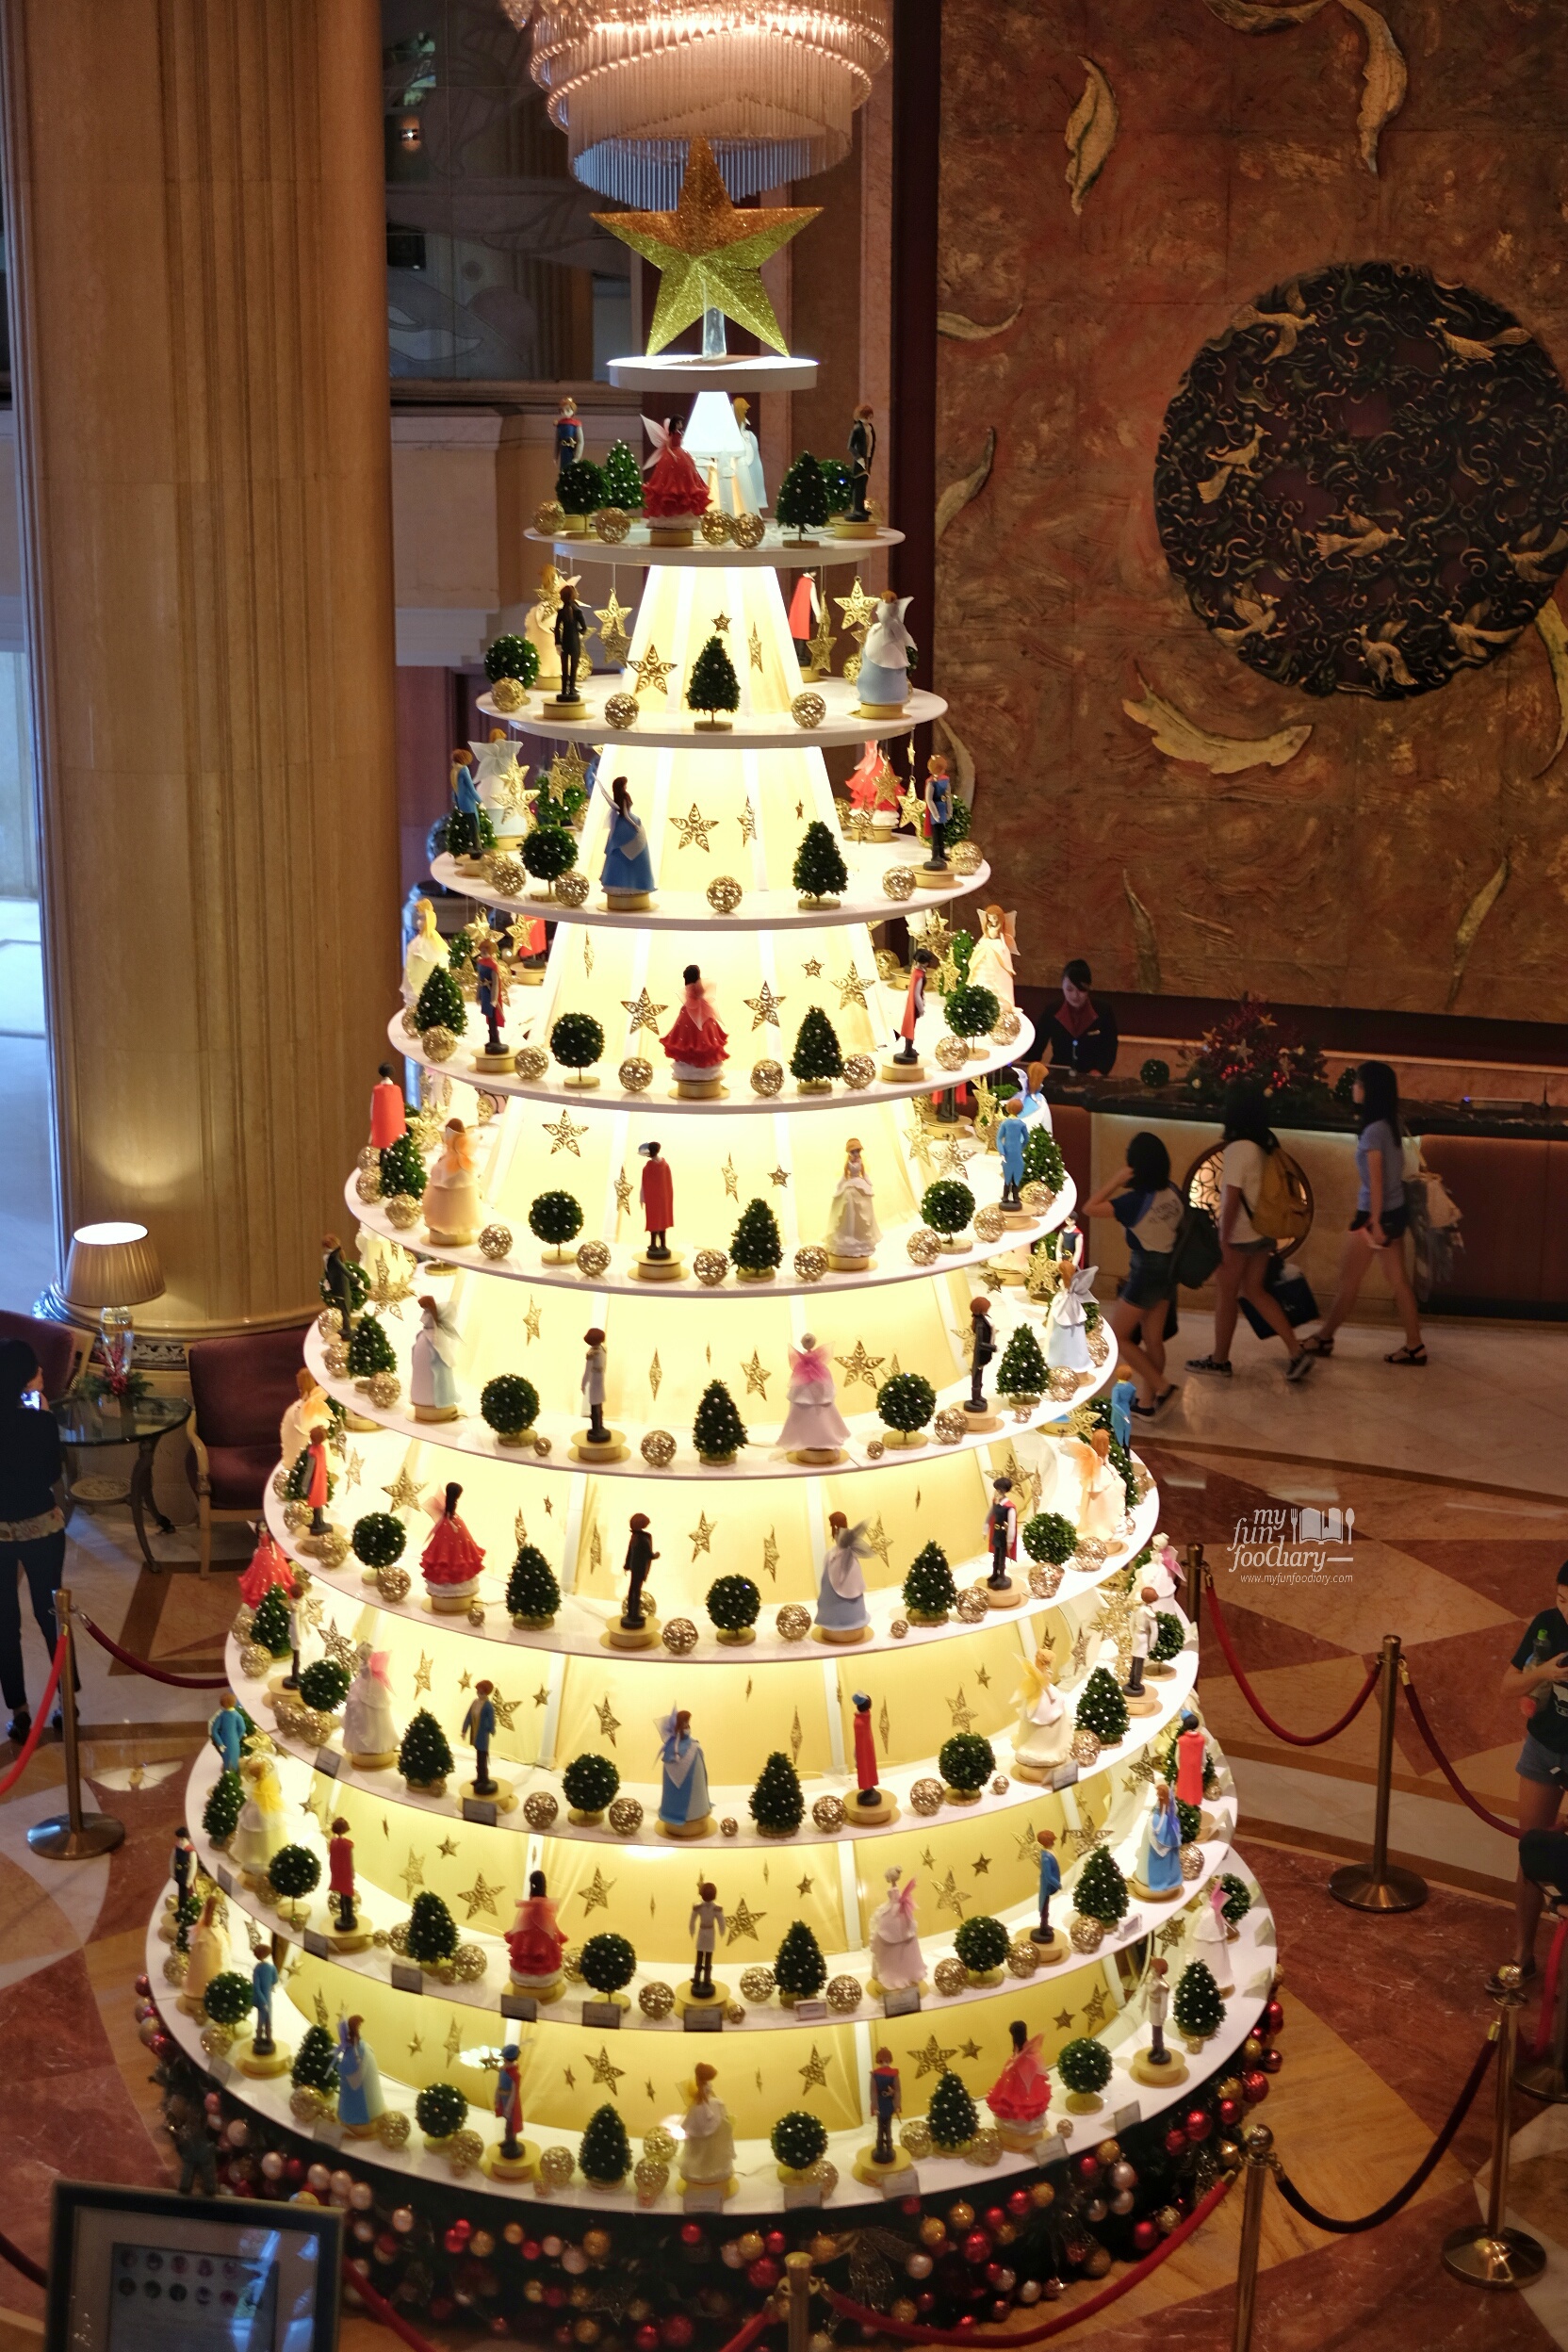 Once Upon A Christmas Tree at Tower Wing Shangri-La Singapore by Myfunfoodiary